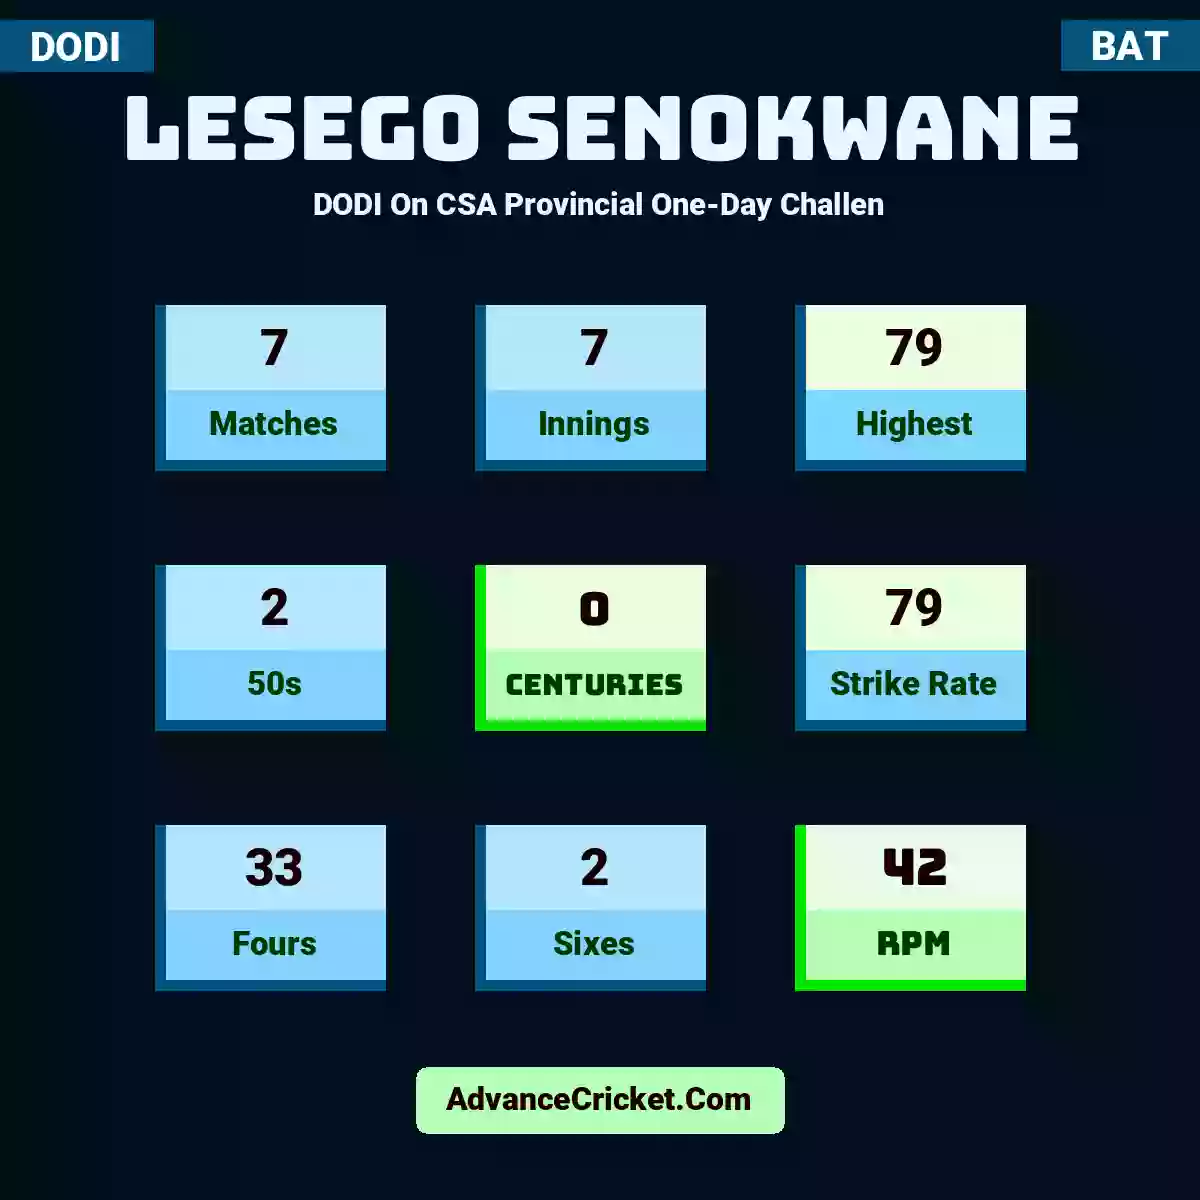 Lesego Senokwane DODI  On CSA Provincial One-Day Challen, Lesego Senokwane played 7 matches, scored 79 runs as highest, 2 half-centuries, and 0 centuries, with a strike rate of 79. L.Senokwane hit 33 fours and 2 sixes, with an RPM of 42.